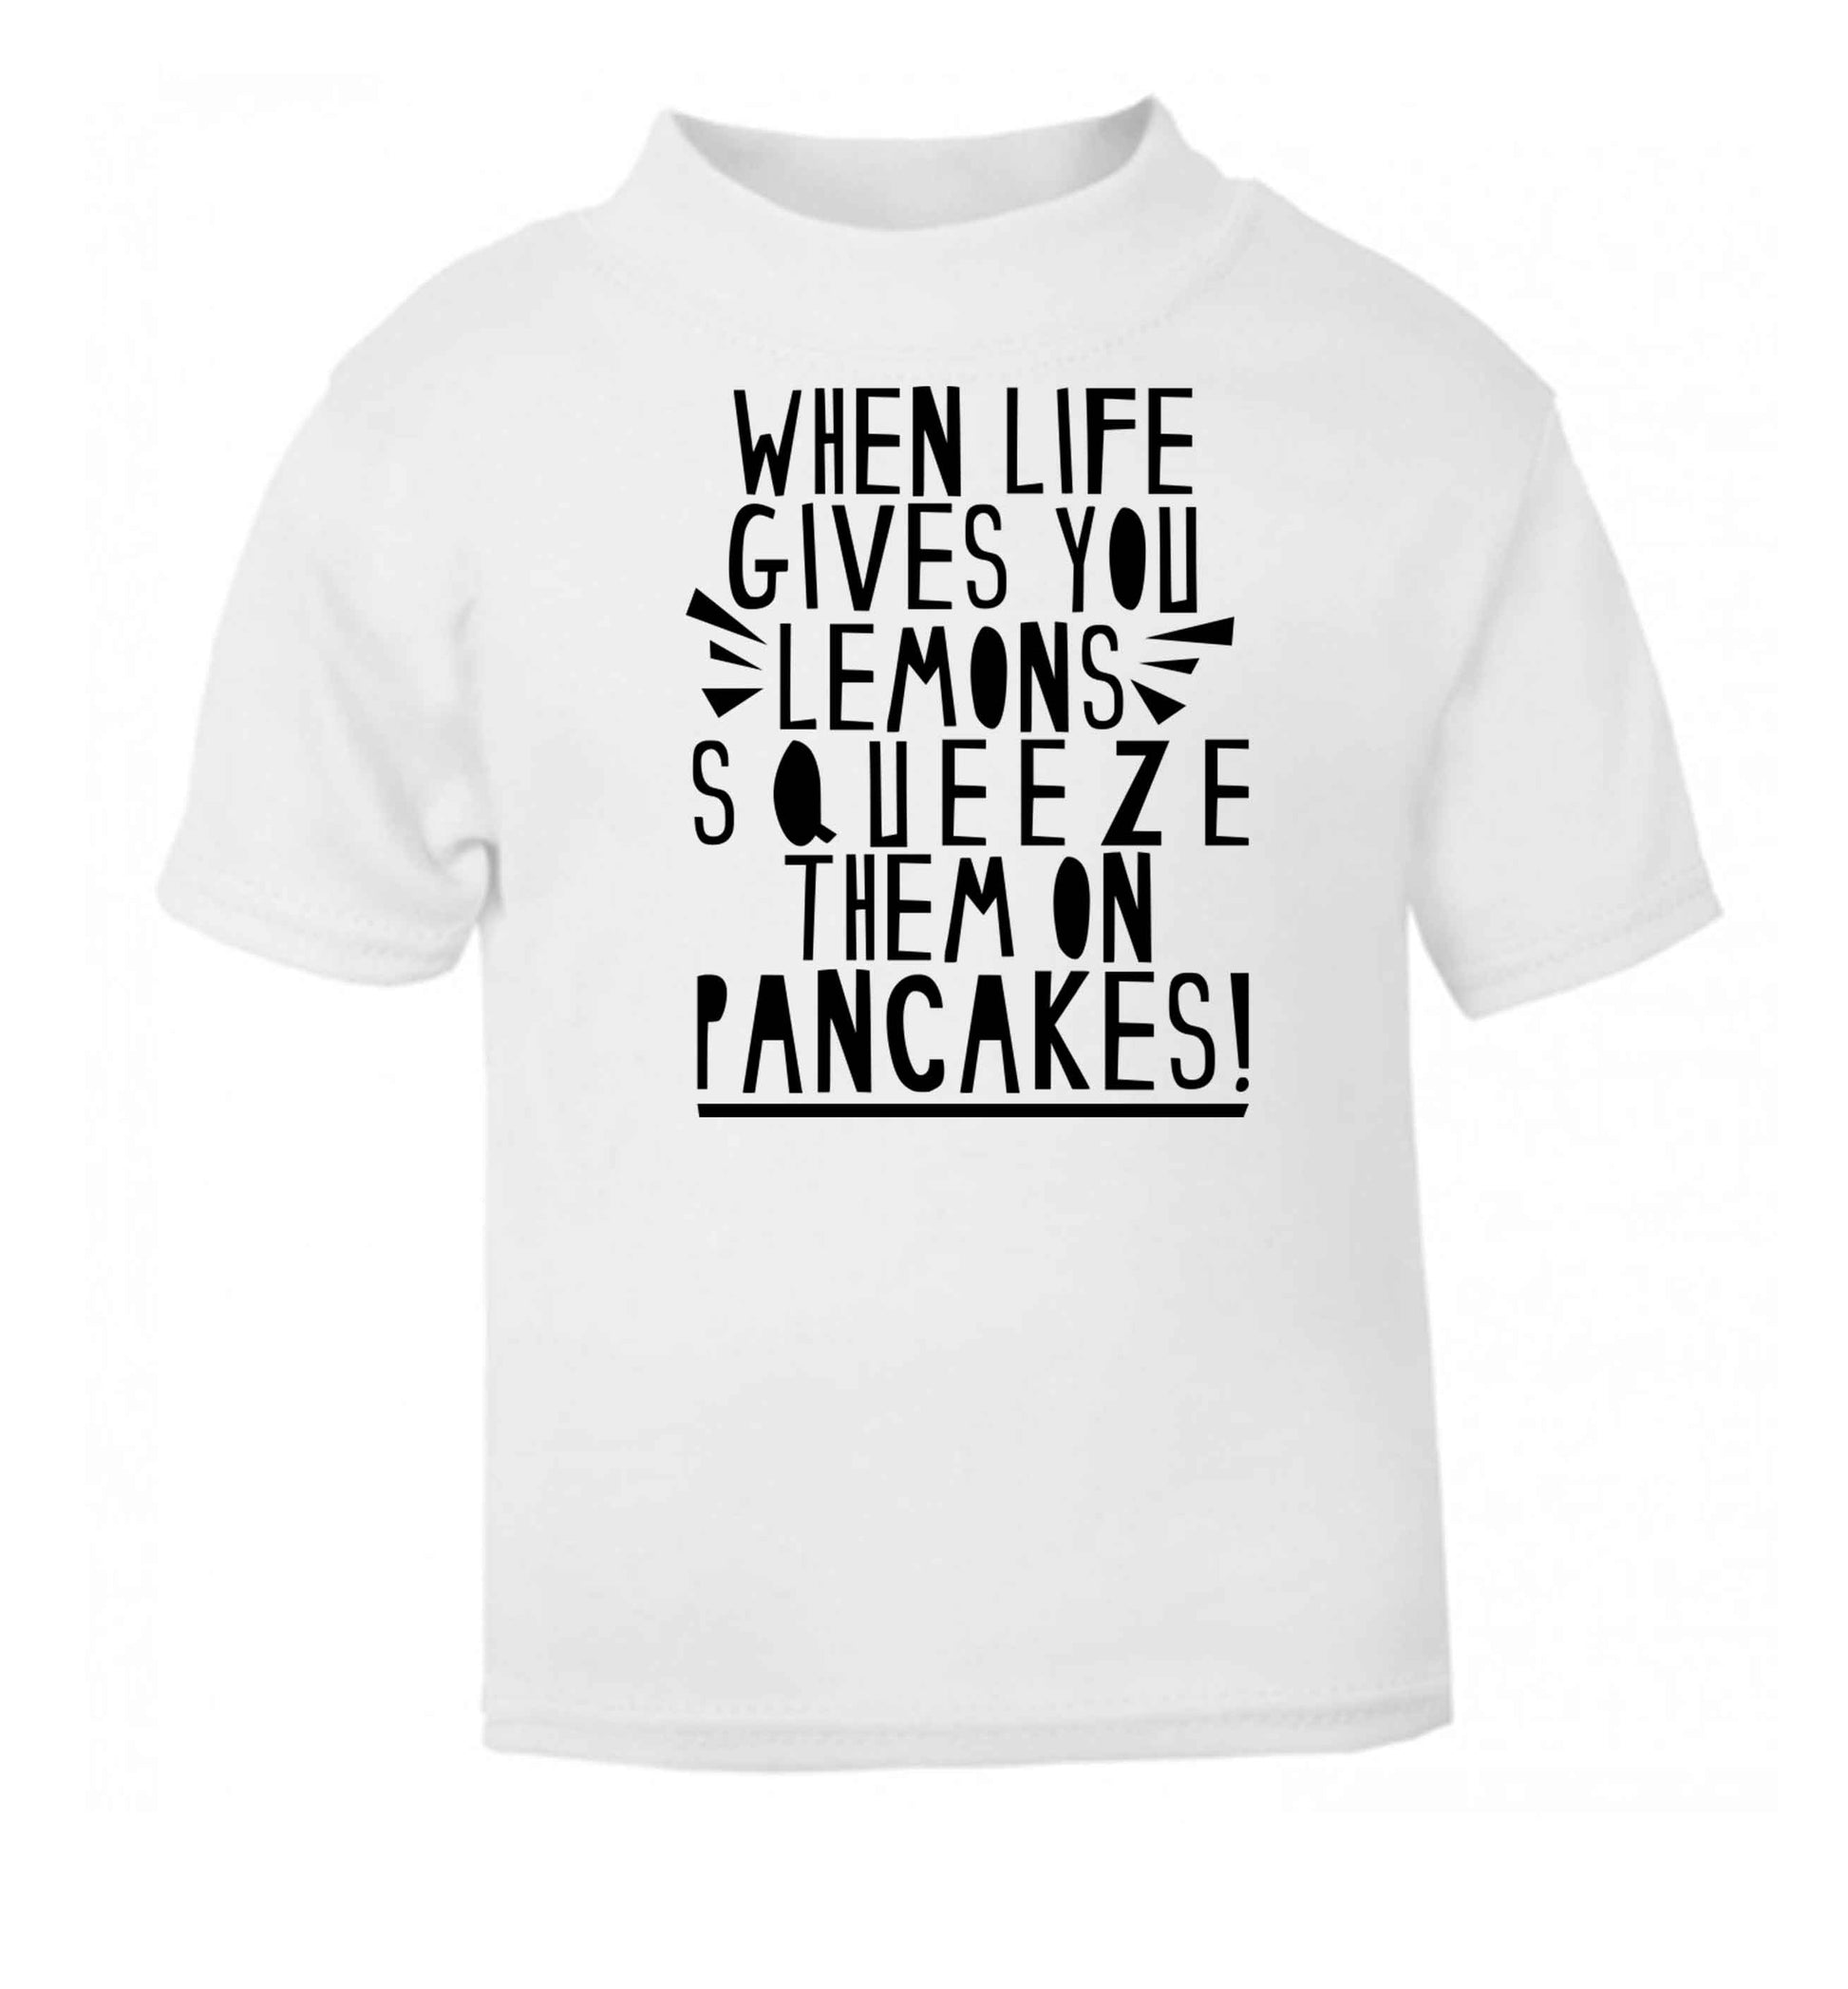 When life gives you lemons squeeze them on pancakes! white baby toddler Tshirt 2 Years